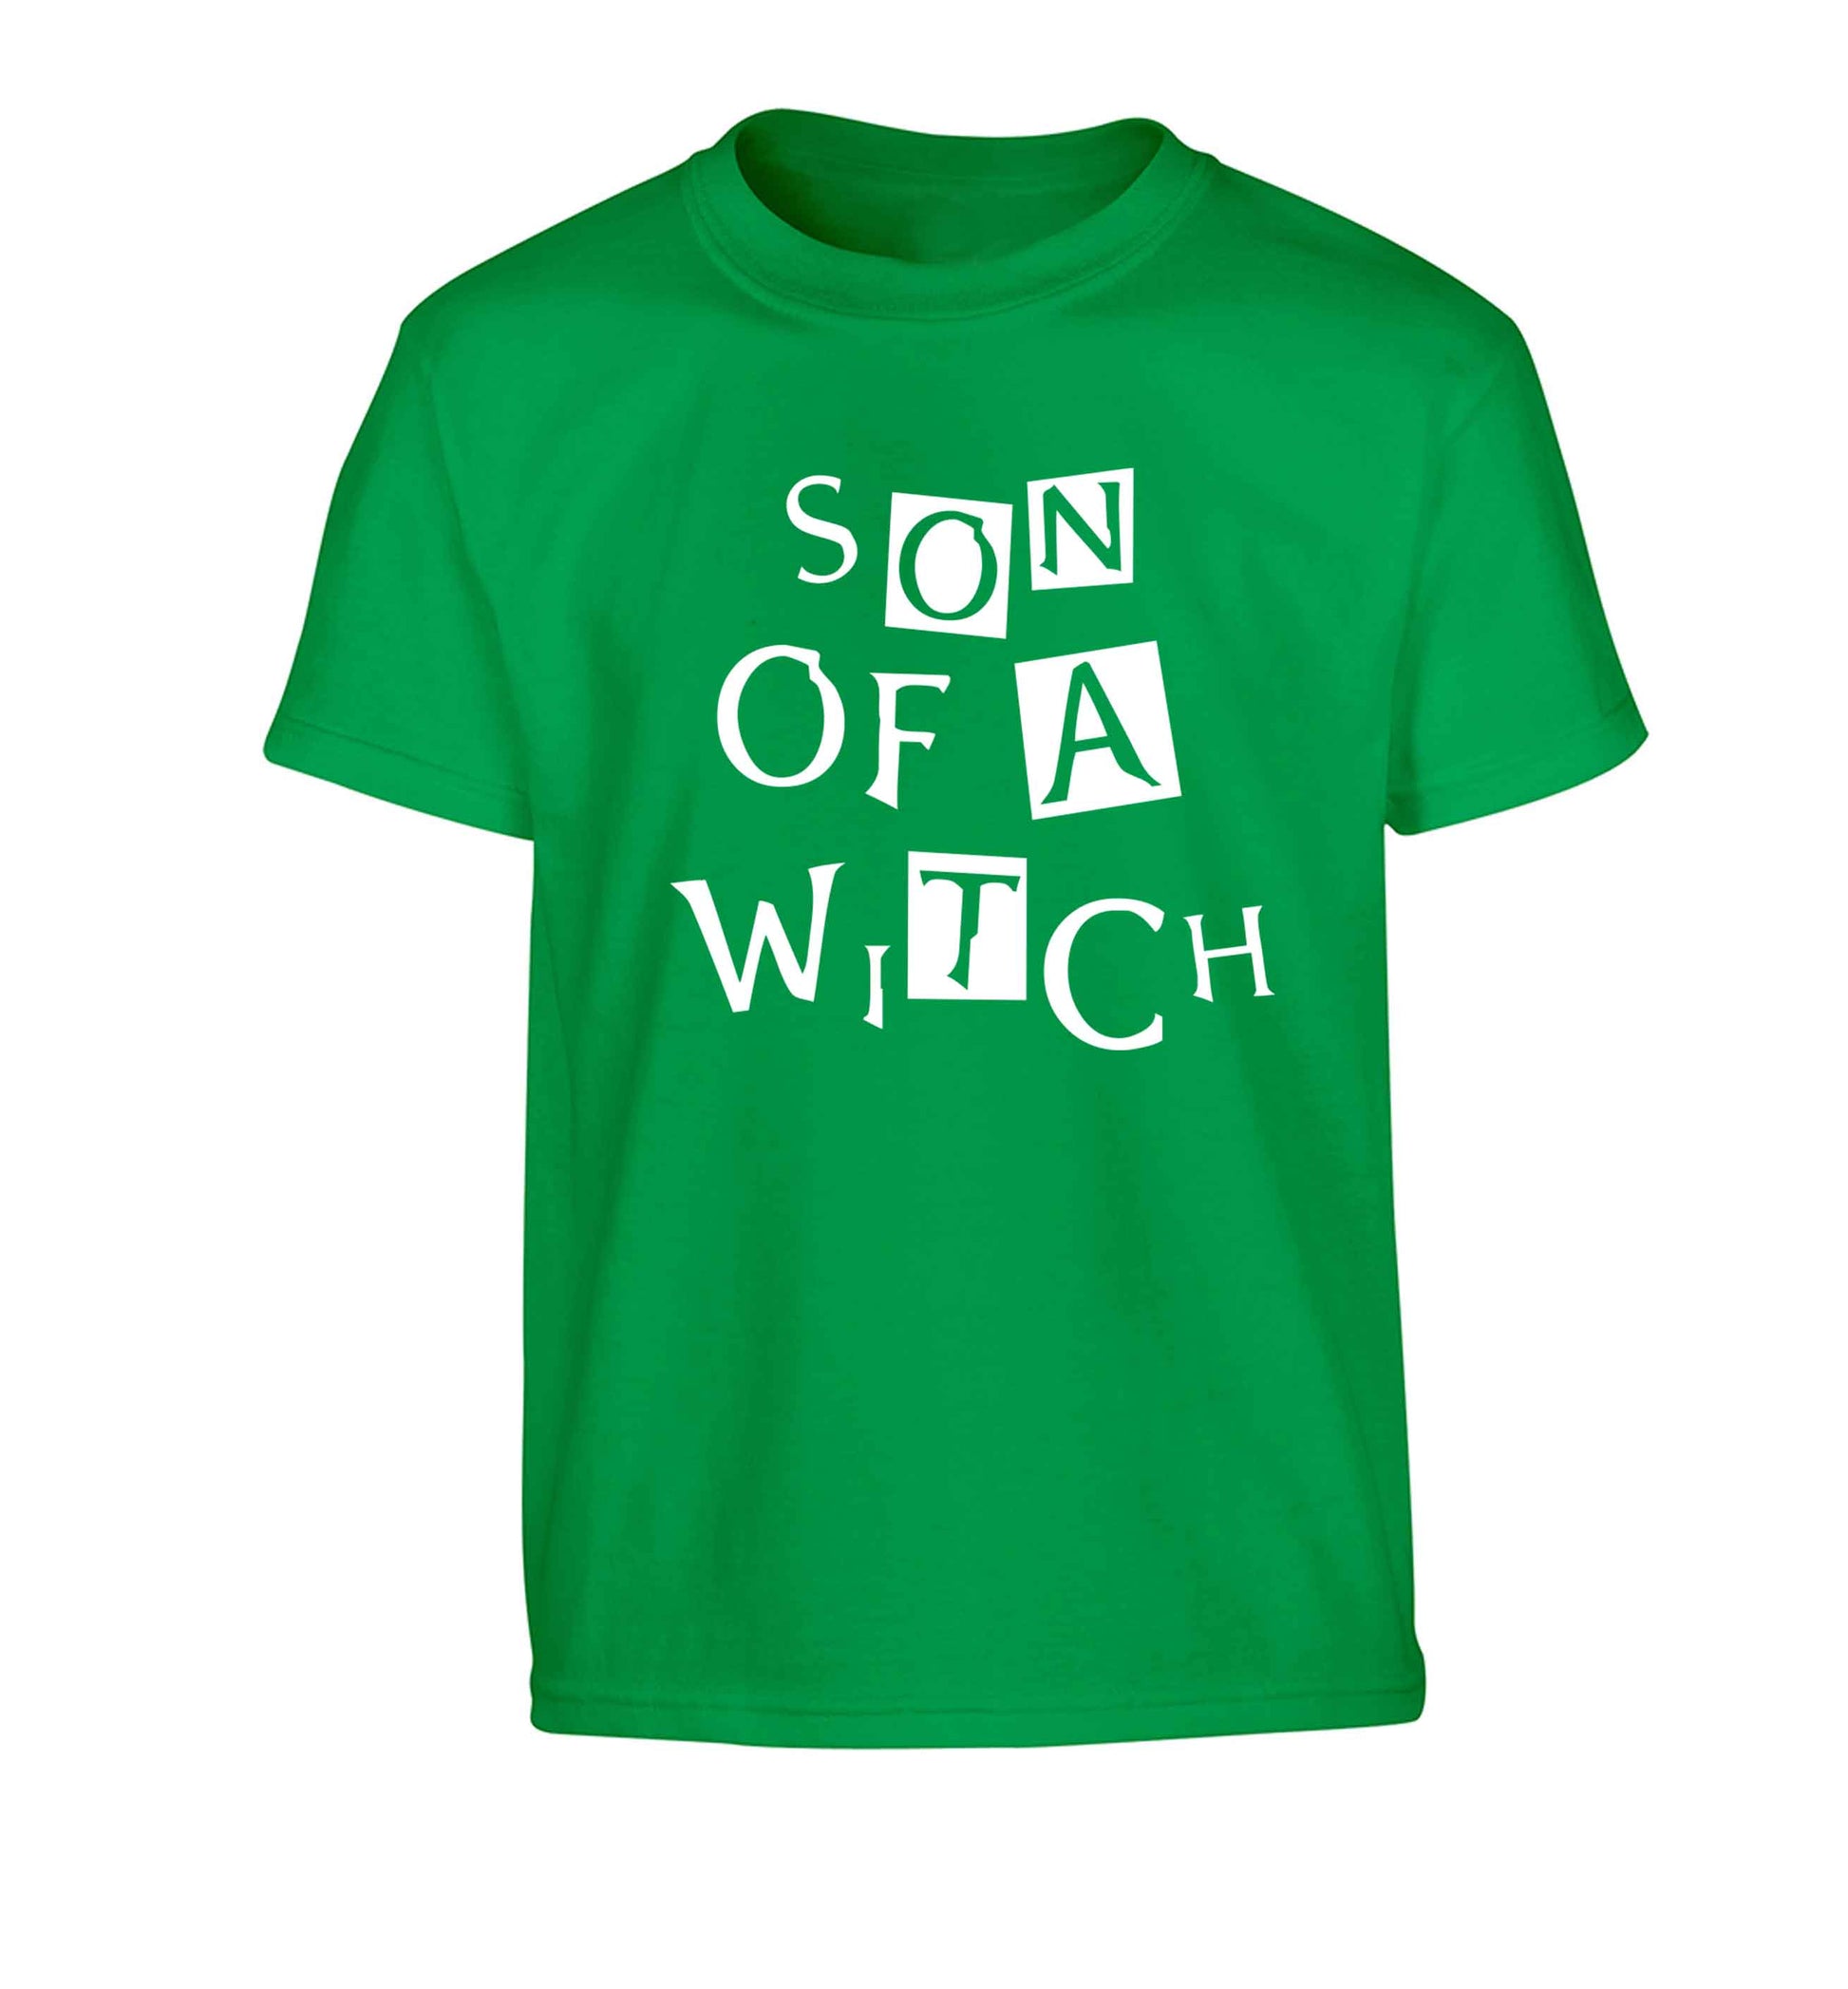 Son of a witch Children's green Tshirt 12-13 Years